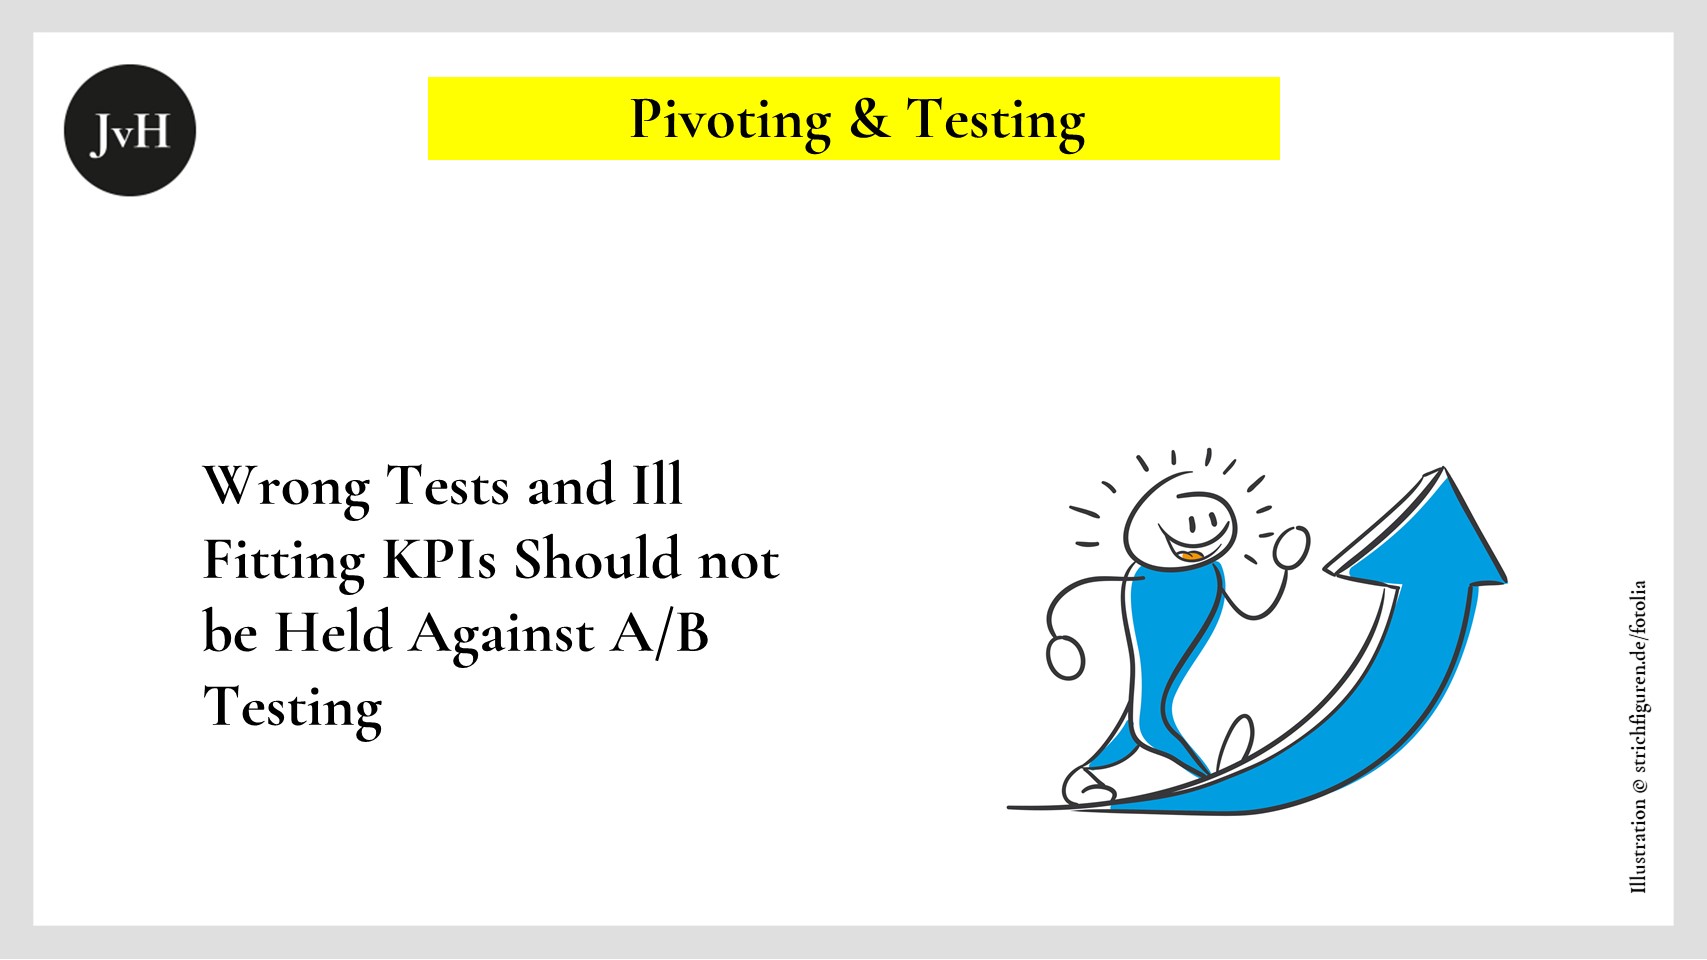 Ill Fitting KPIs are no Argument against A/B-Tests